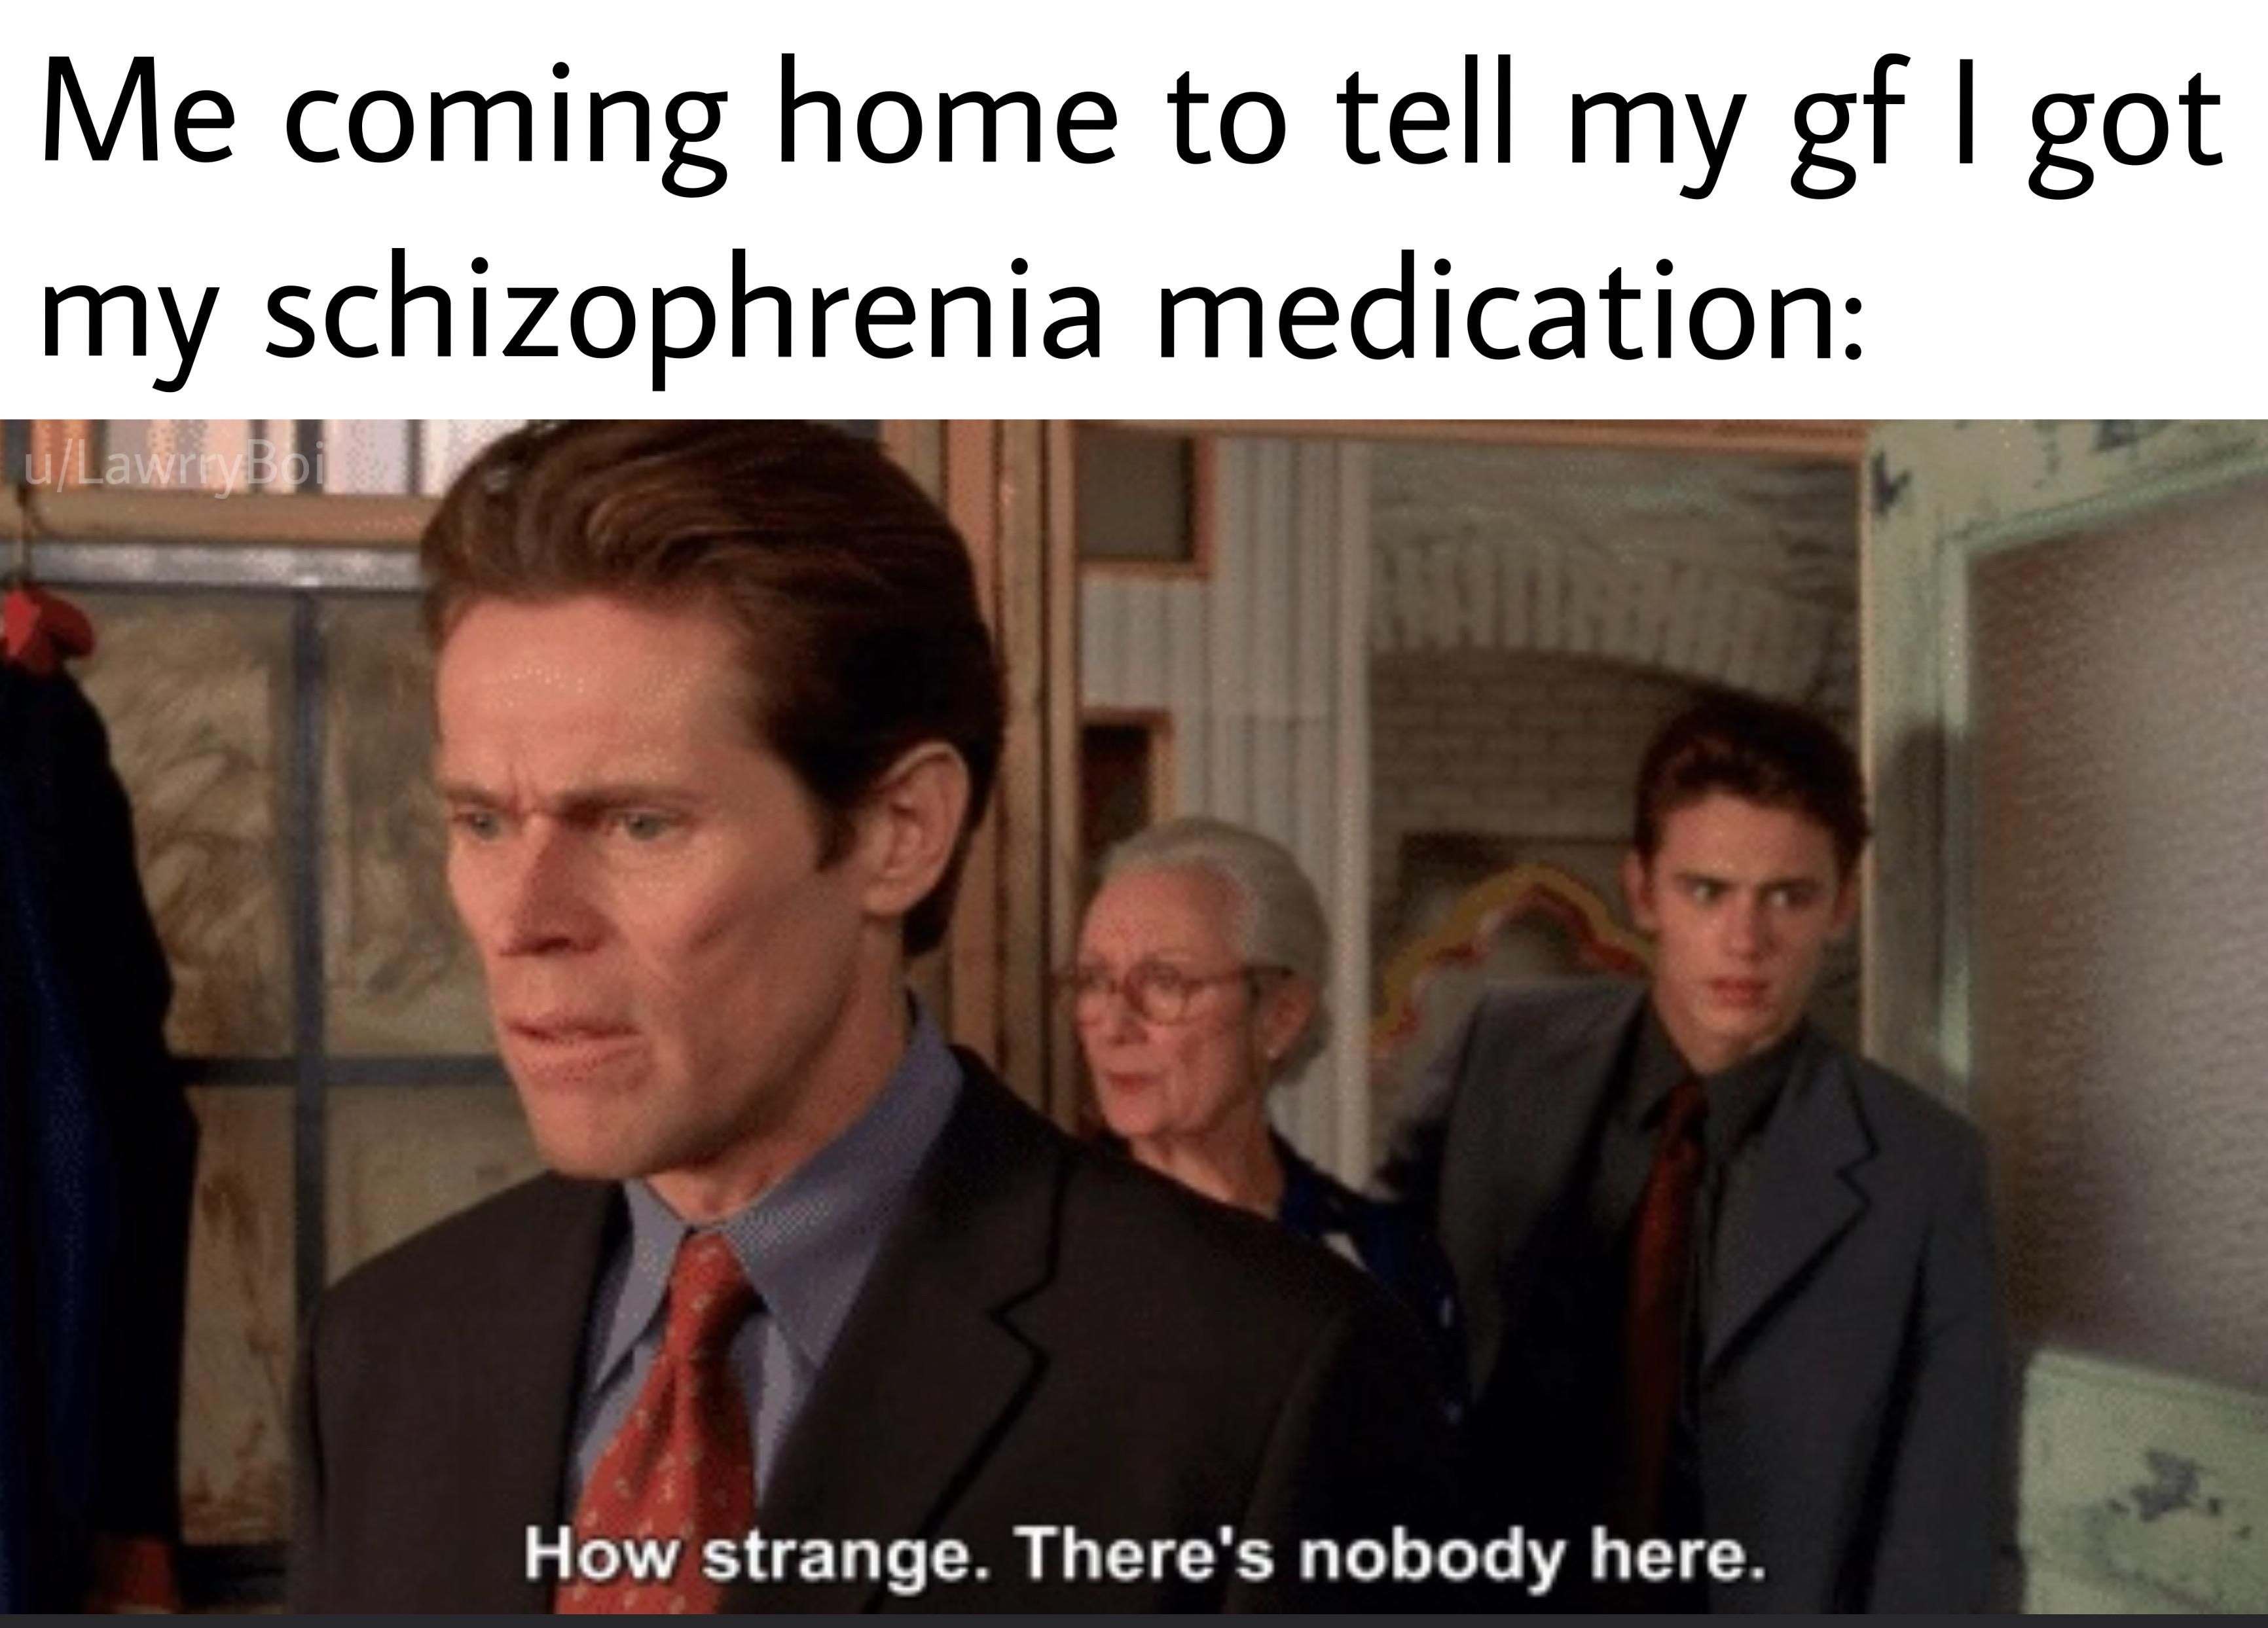 imagine being in a room with everyone - t Me coming home to tell my gf I got my schizophrenia medication uLawrryBoi How strange. There's nobody here.